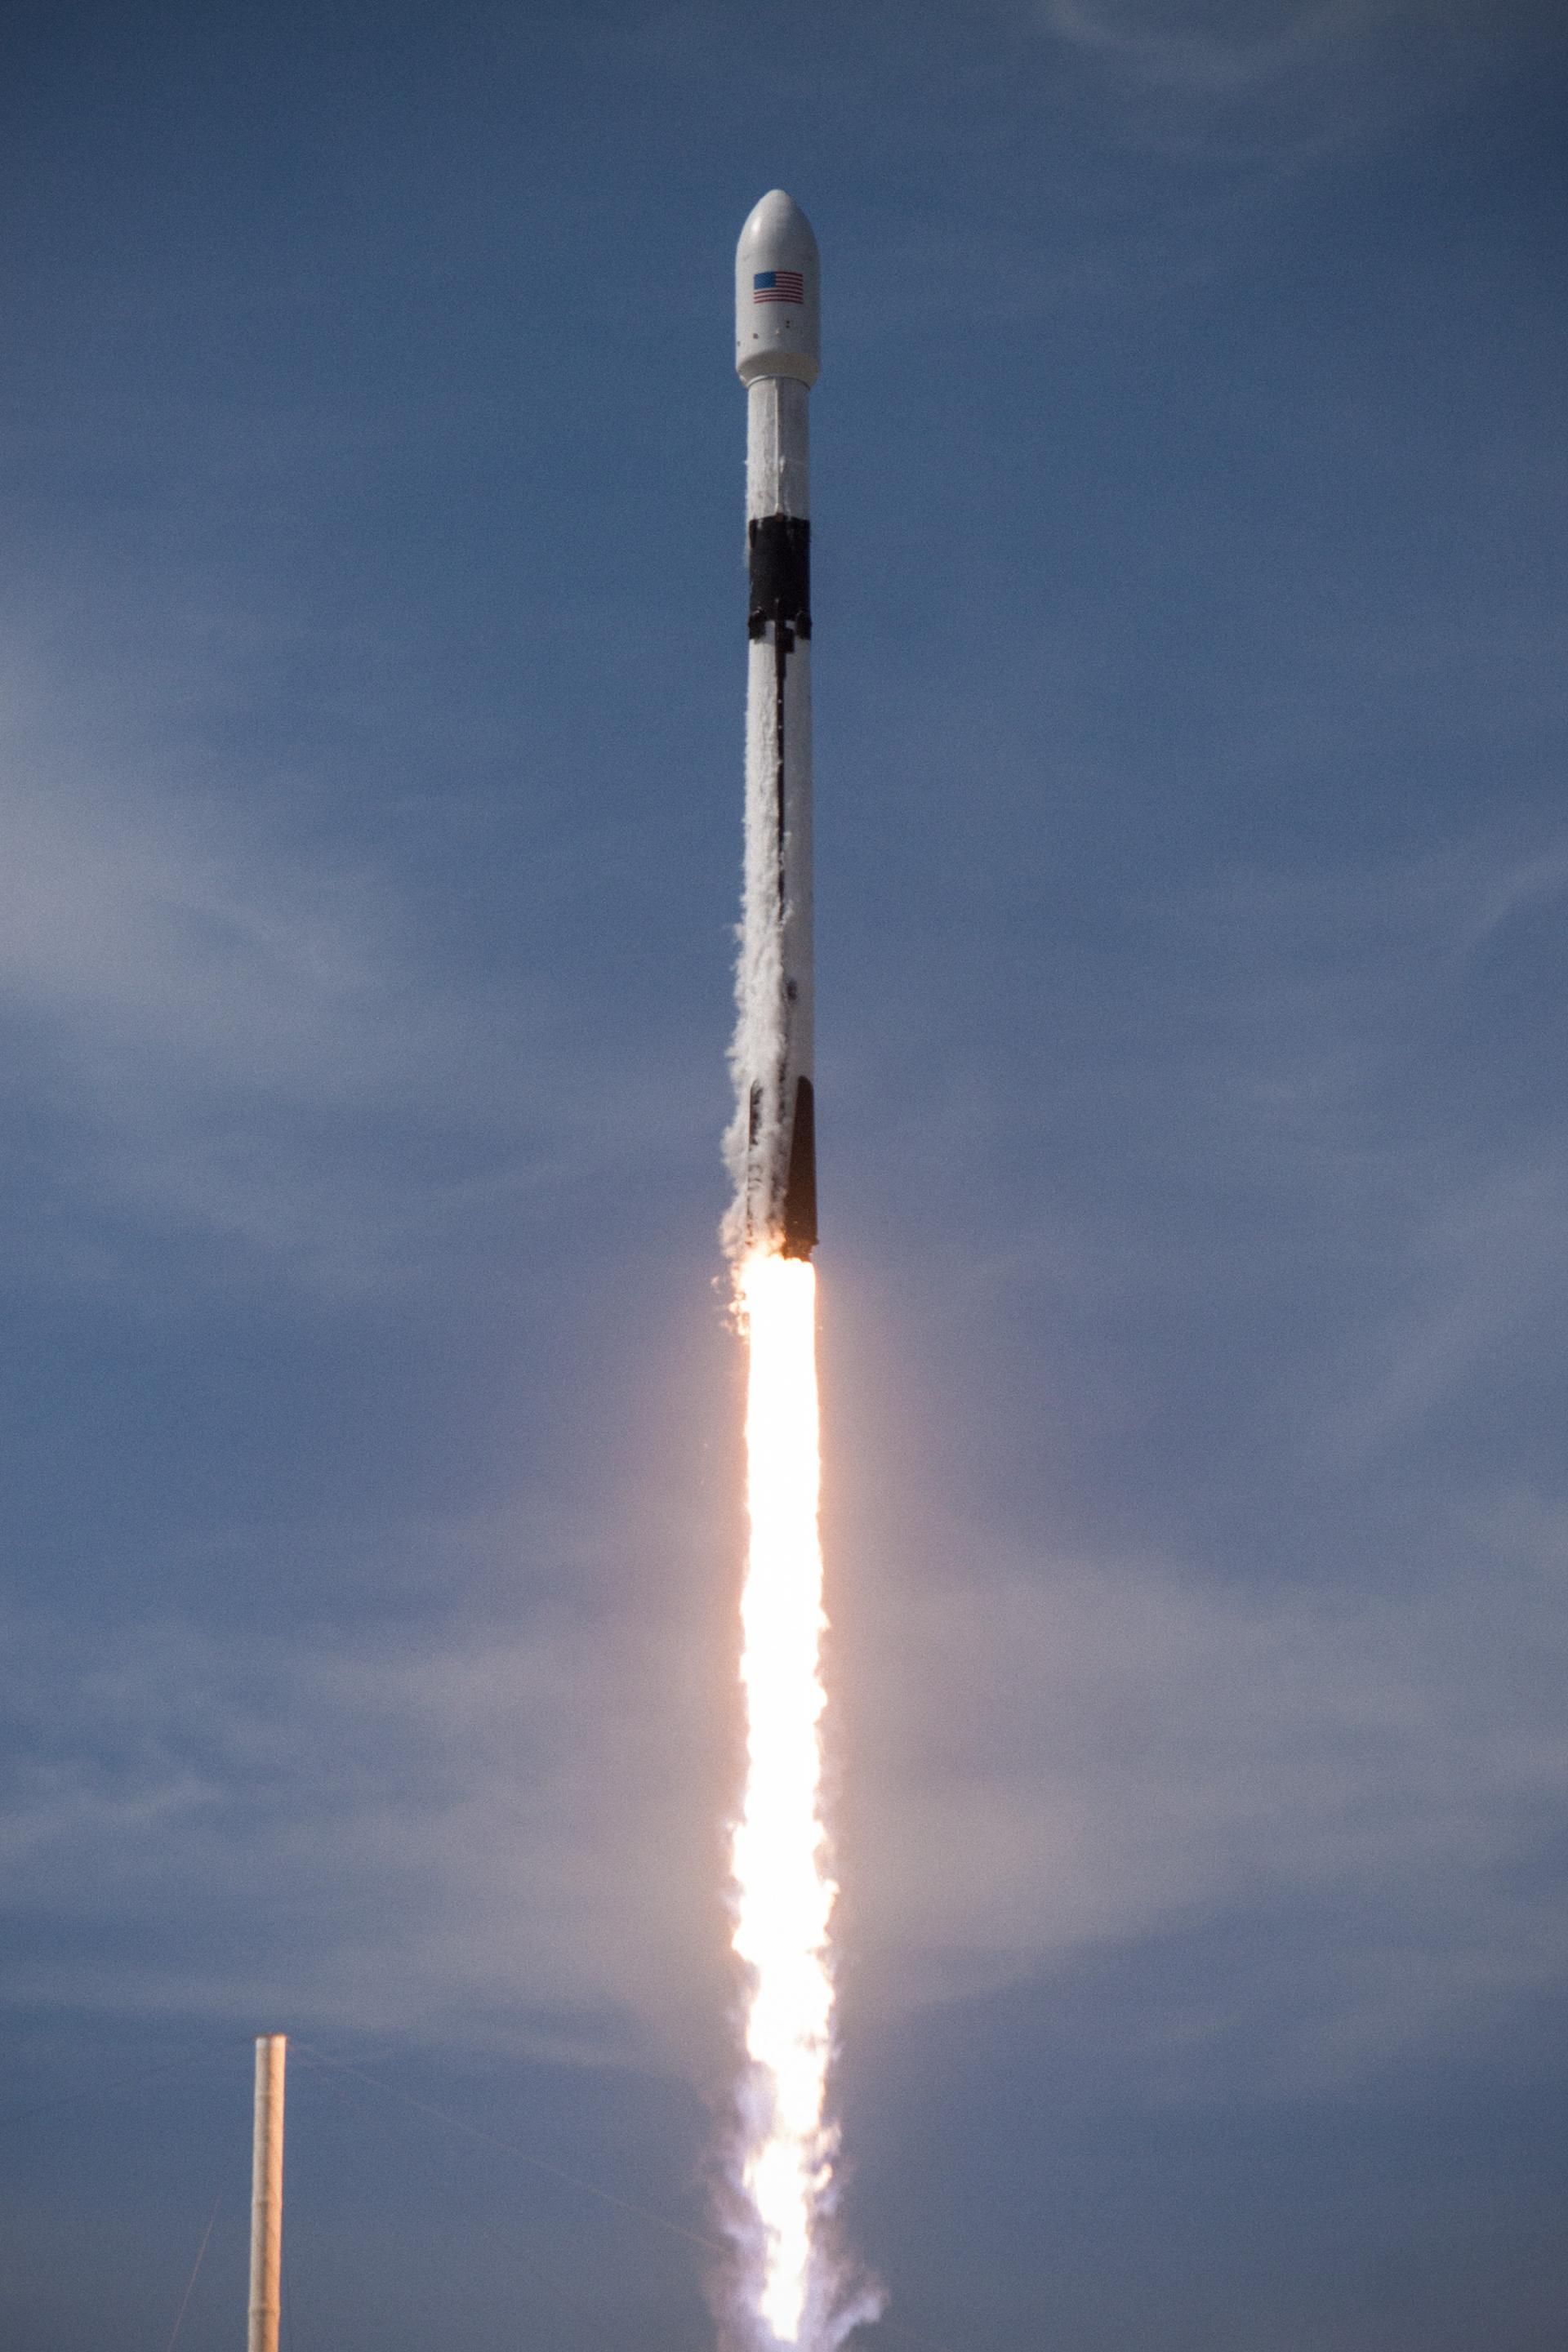 SpaceX Launch Of A Falcon 9 Block 5. Amos 17. Spacex, Spacex